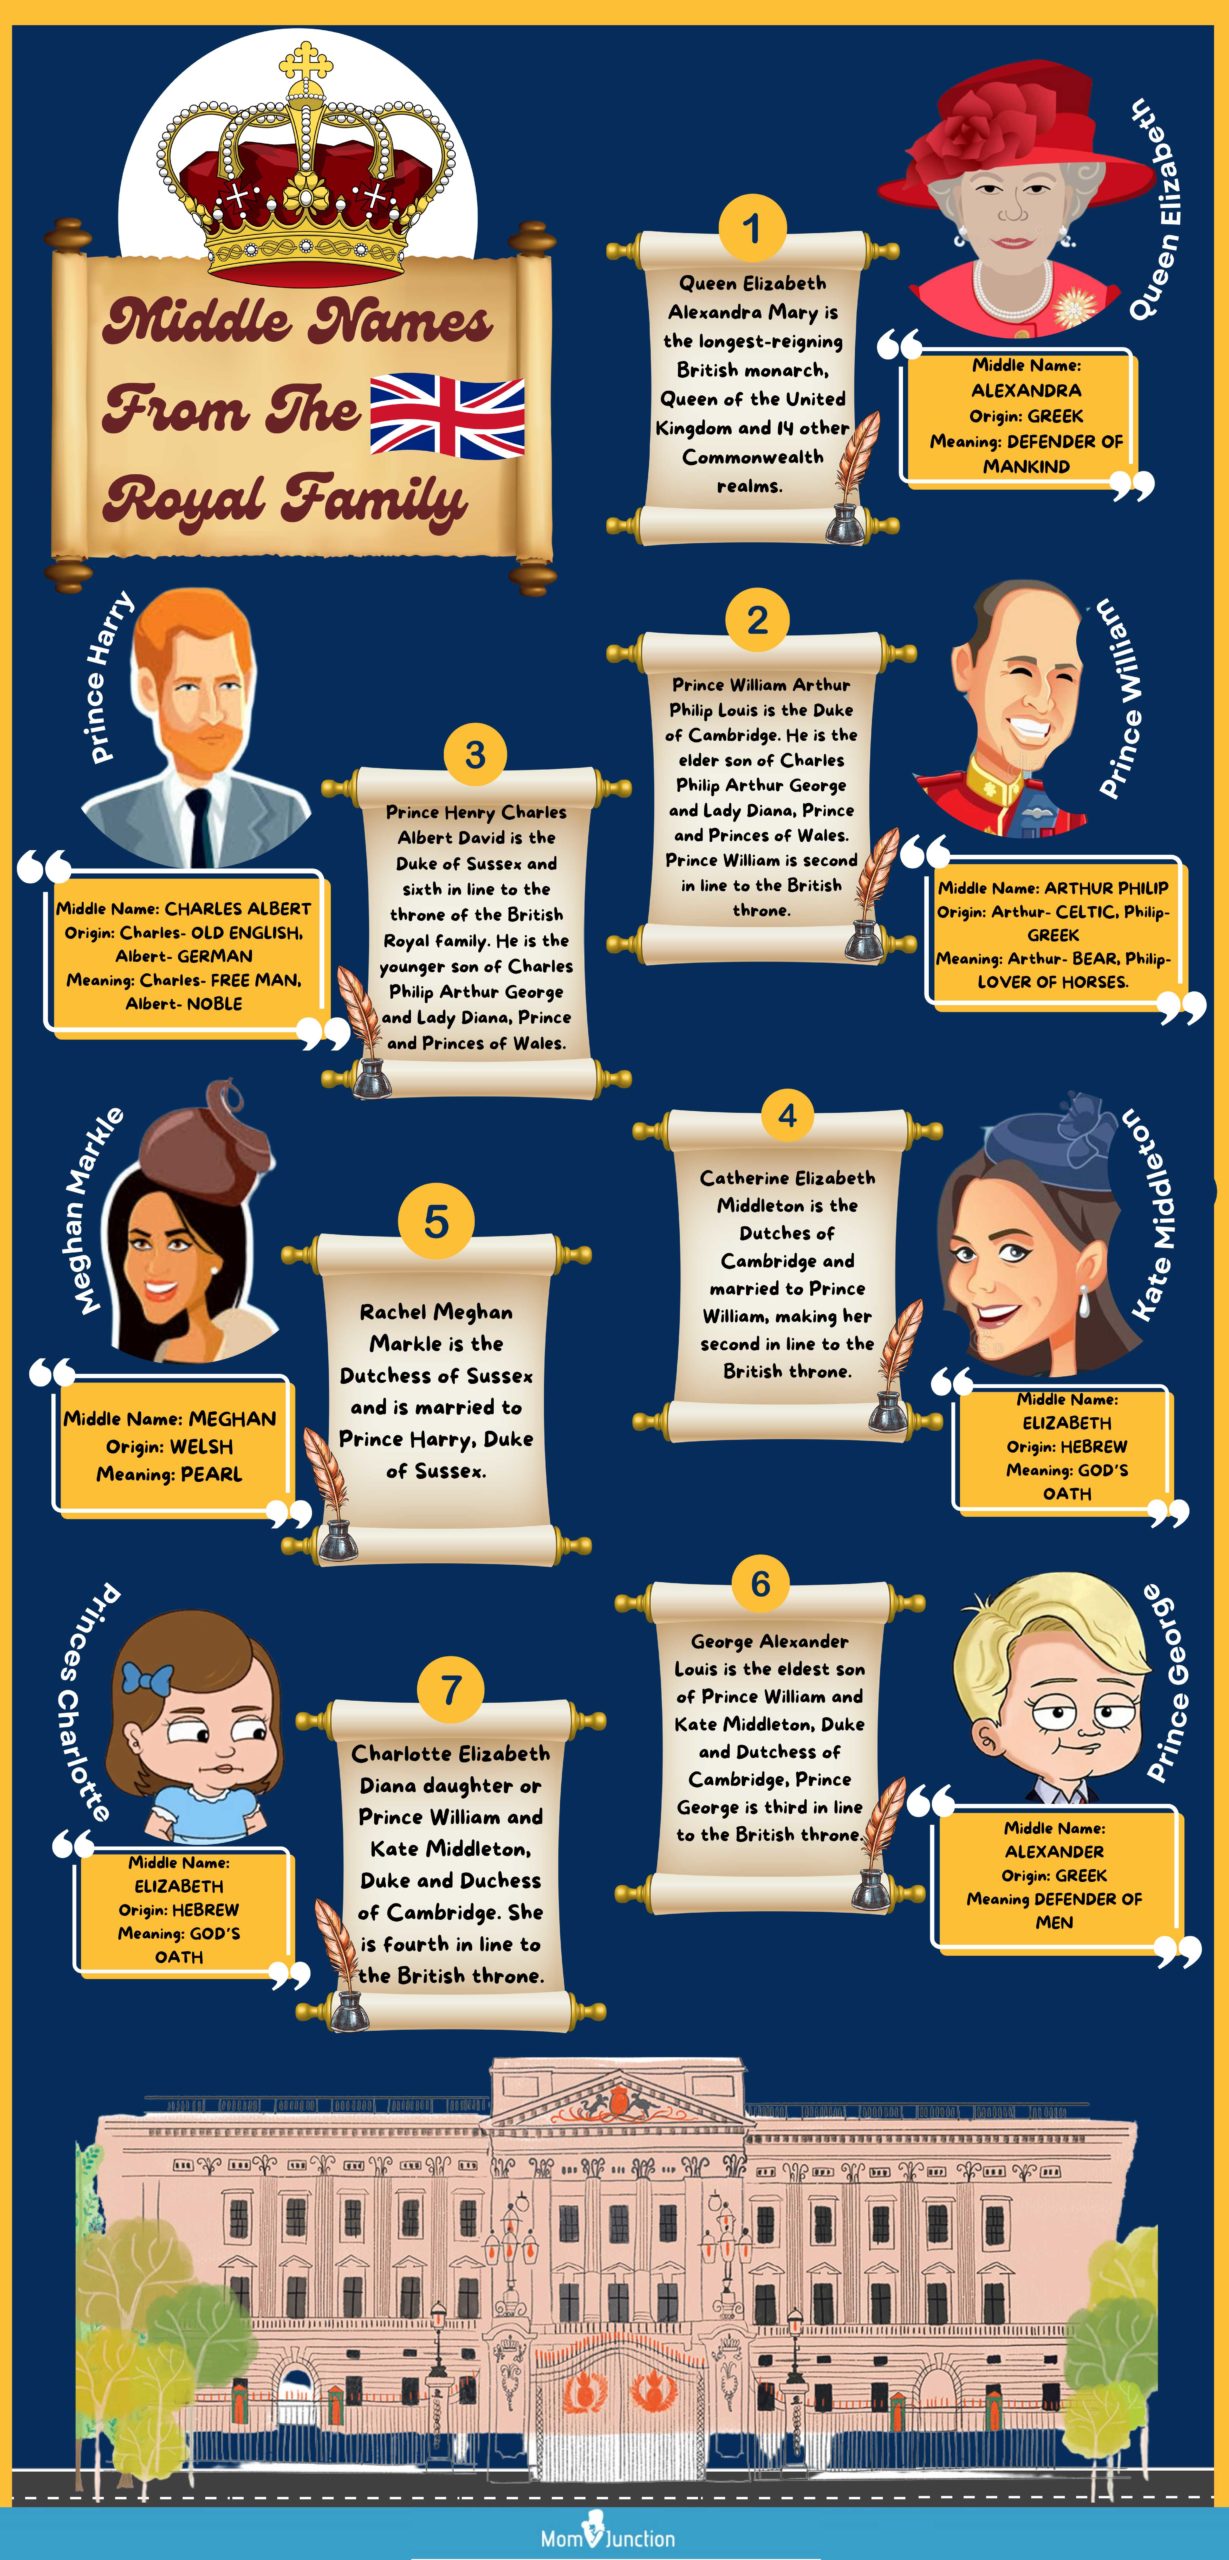 middle names from the royal family (infographic)